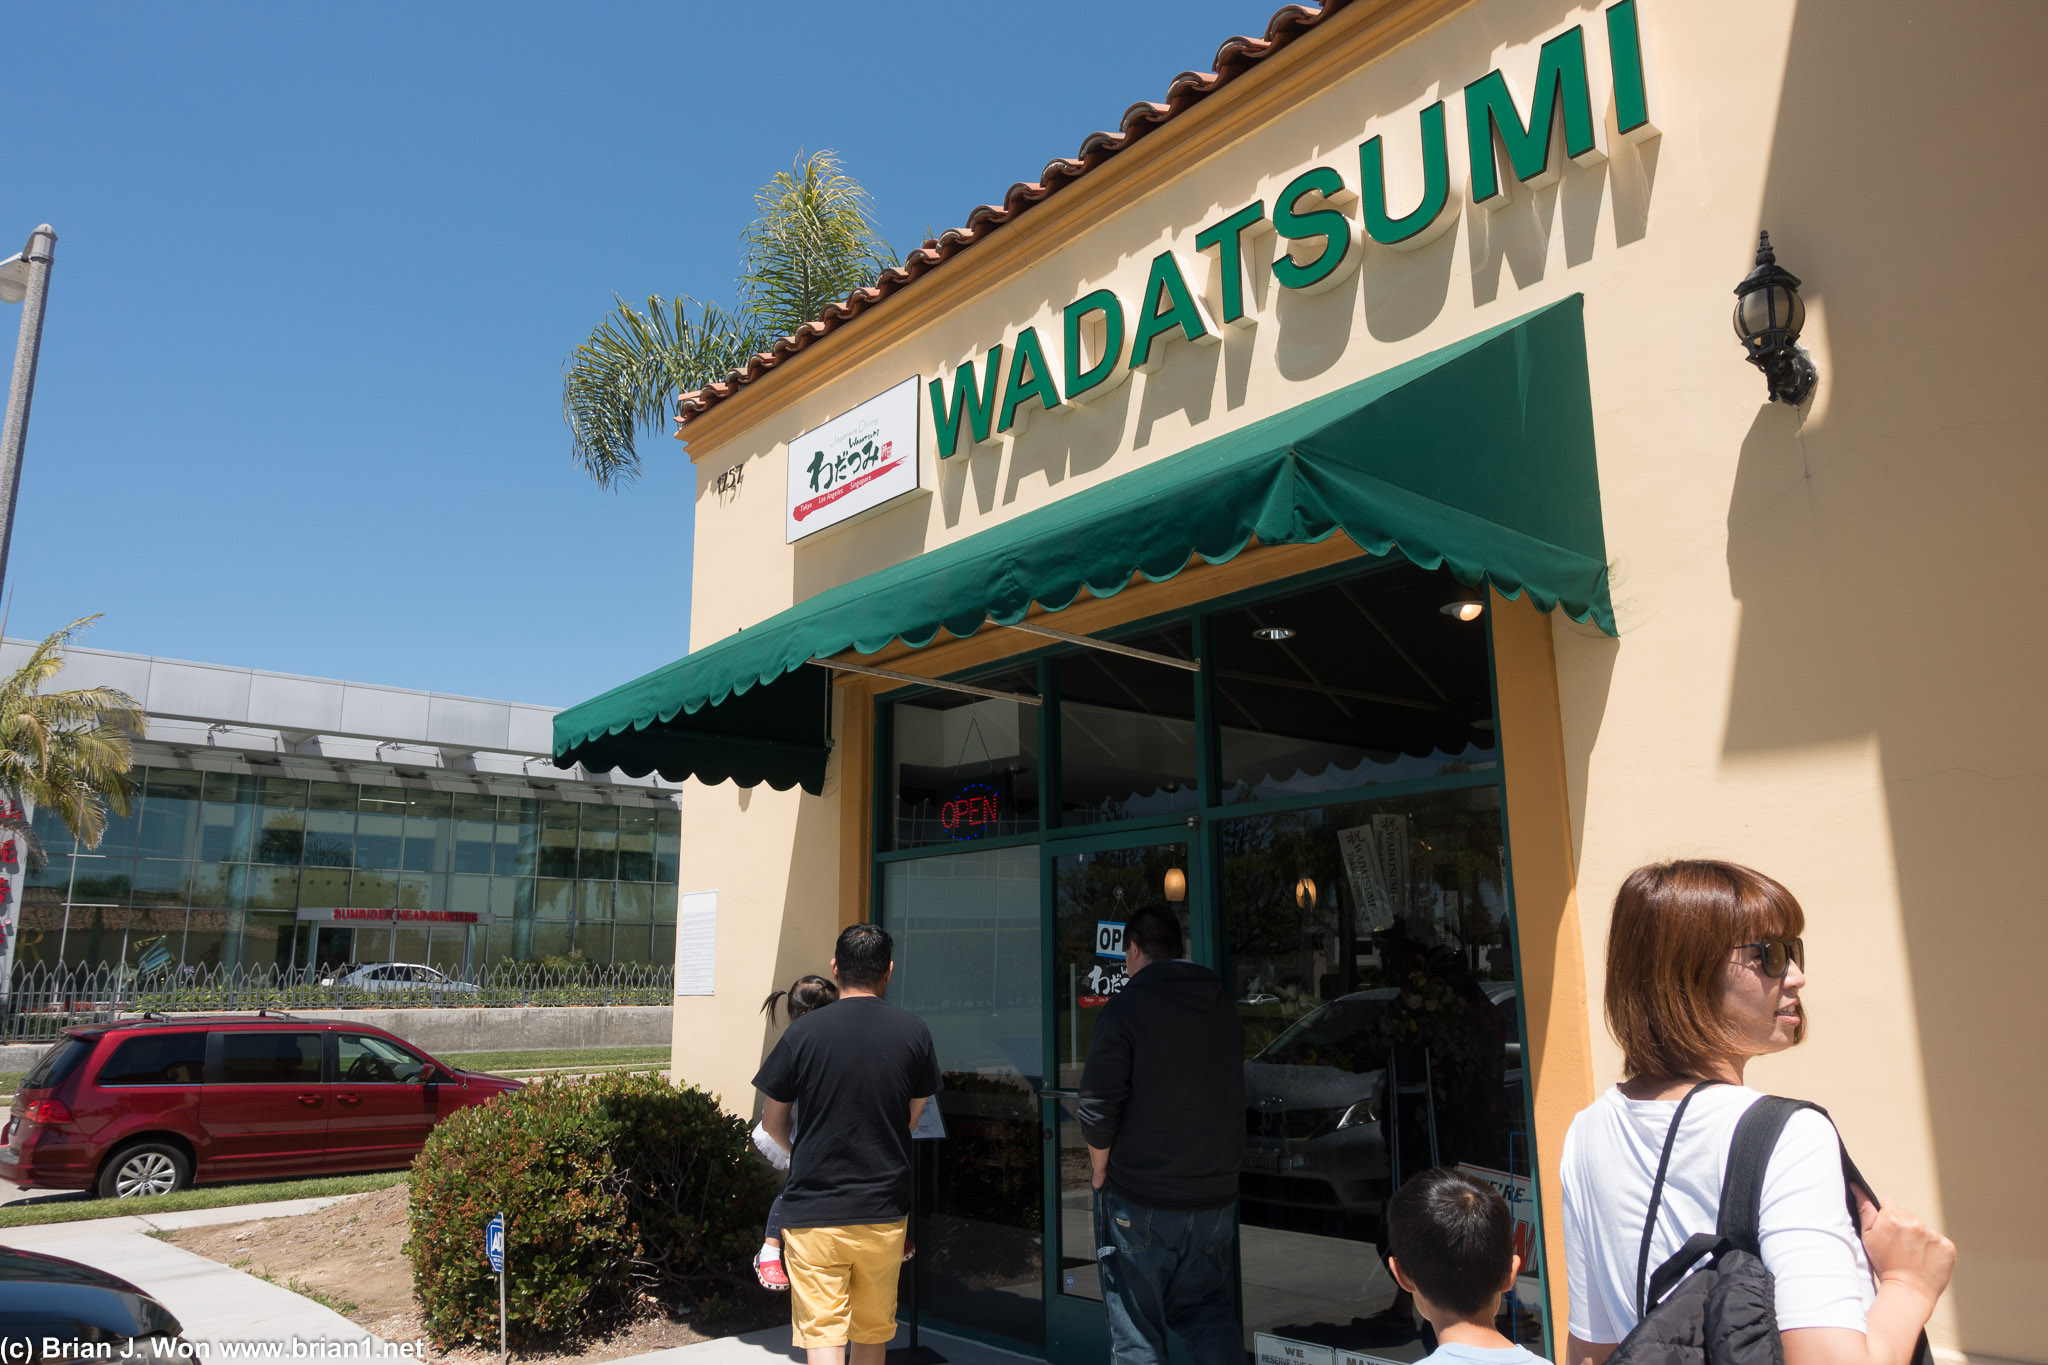 The new Wadatsumi location in Torrance.